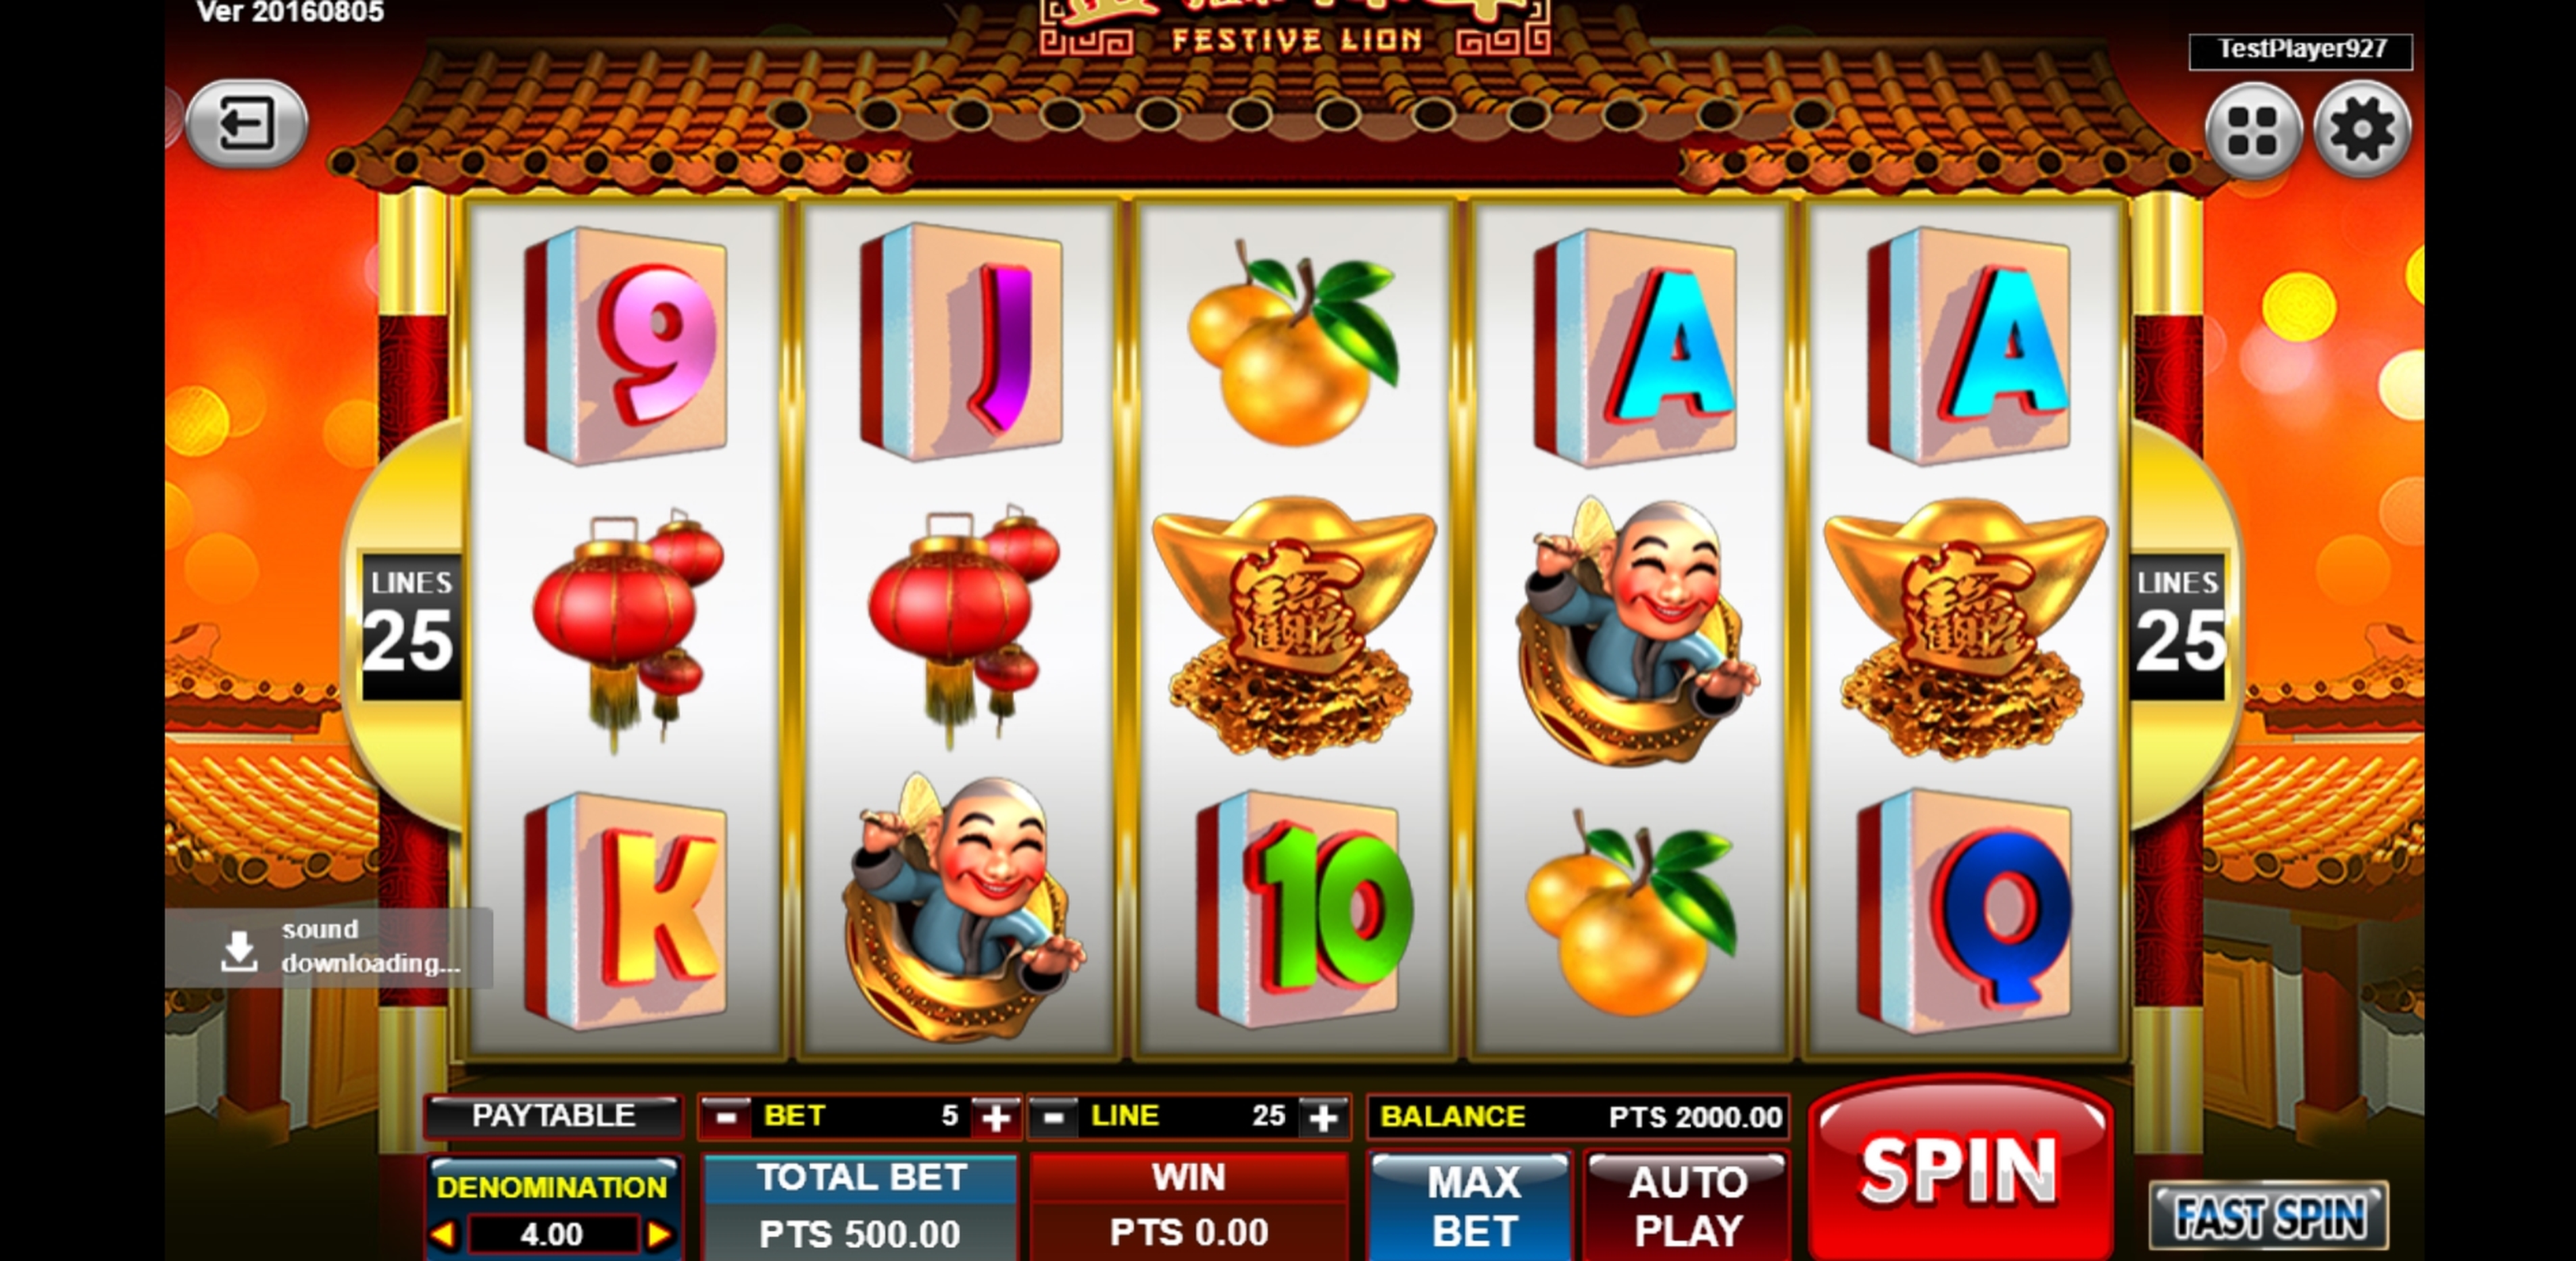 Reels in Festive Lion Slot Game by Spade Gaming